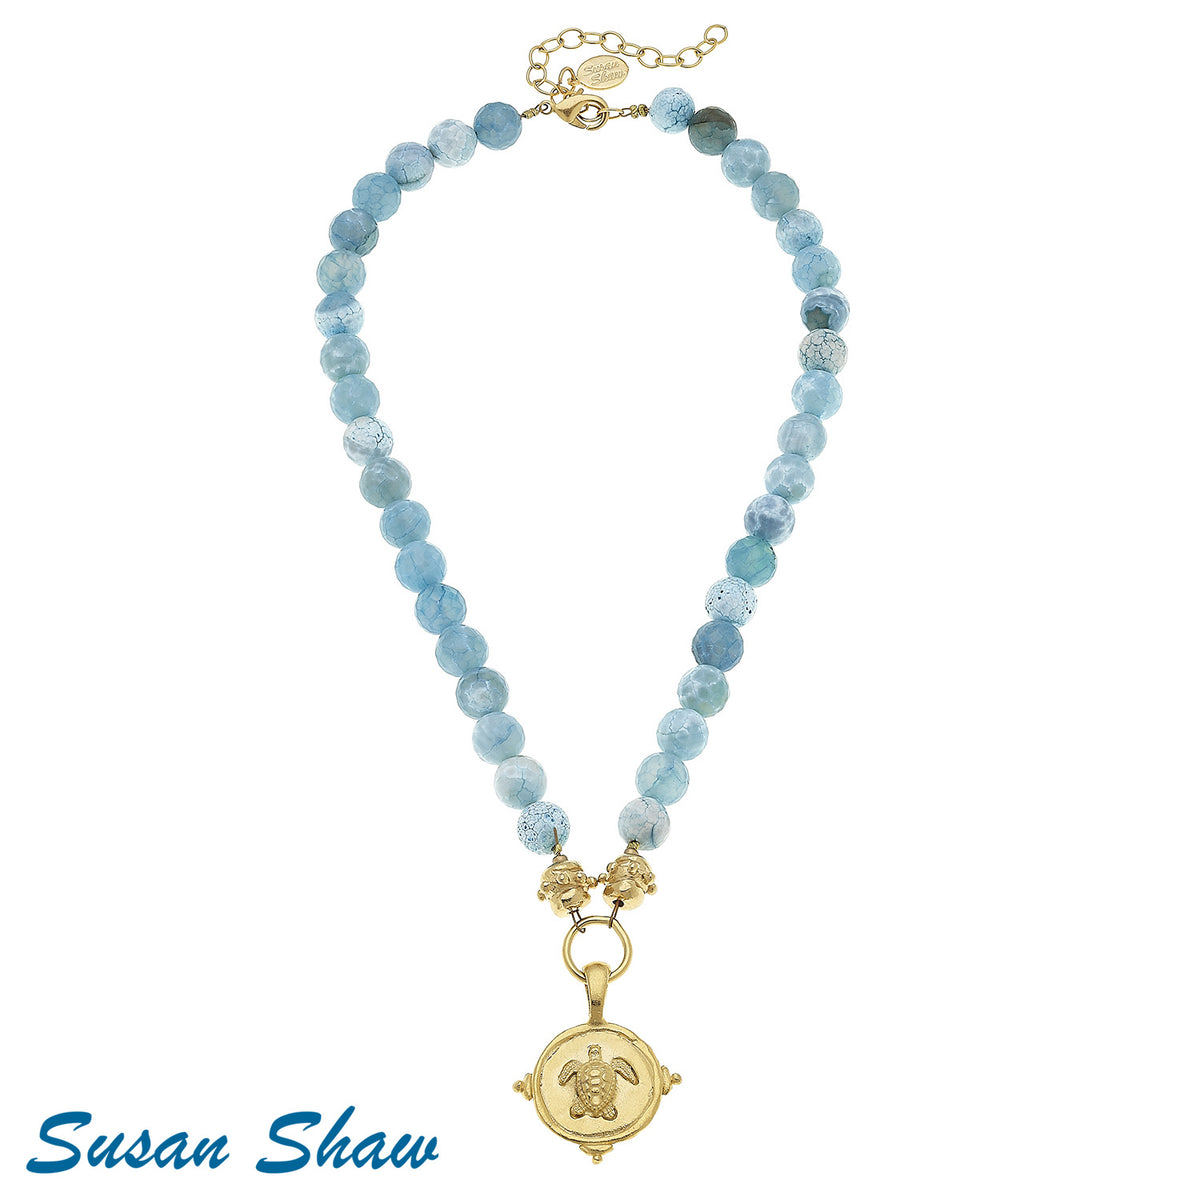 Susan Shaw Necklace: 24kt gold finished Sea Turtle & Aqua Fire Agate